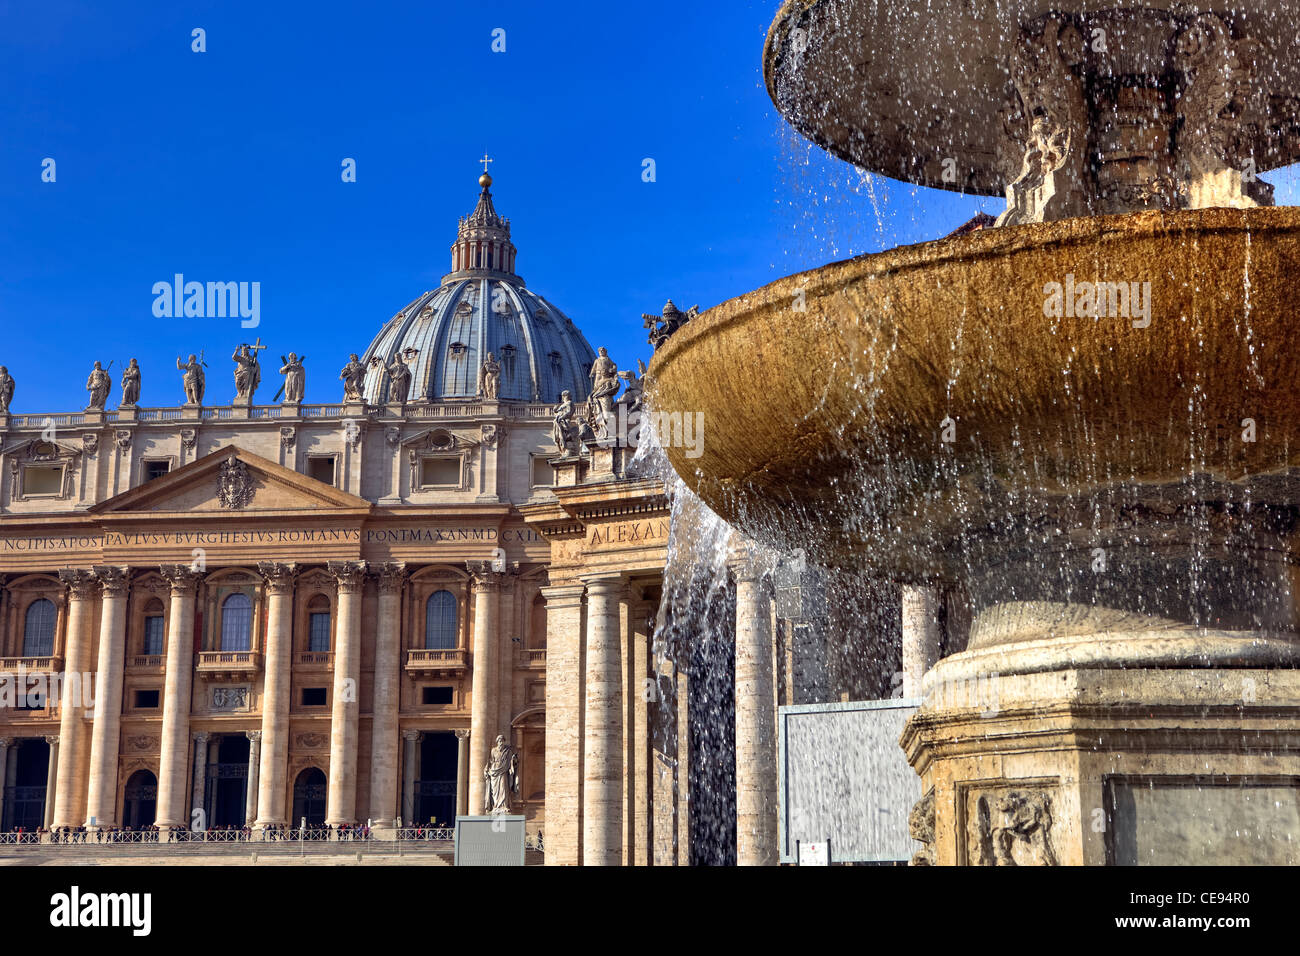 Piazza San Pietro and St. Peter's Basilica in the Vatican. Stock Photo